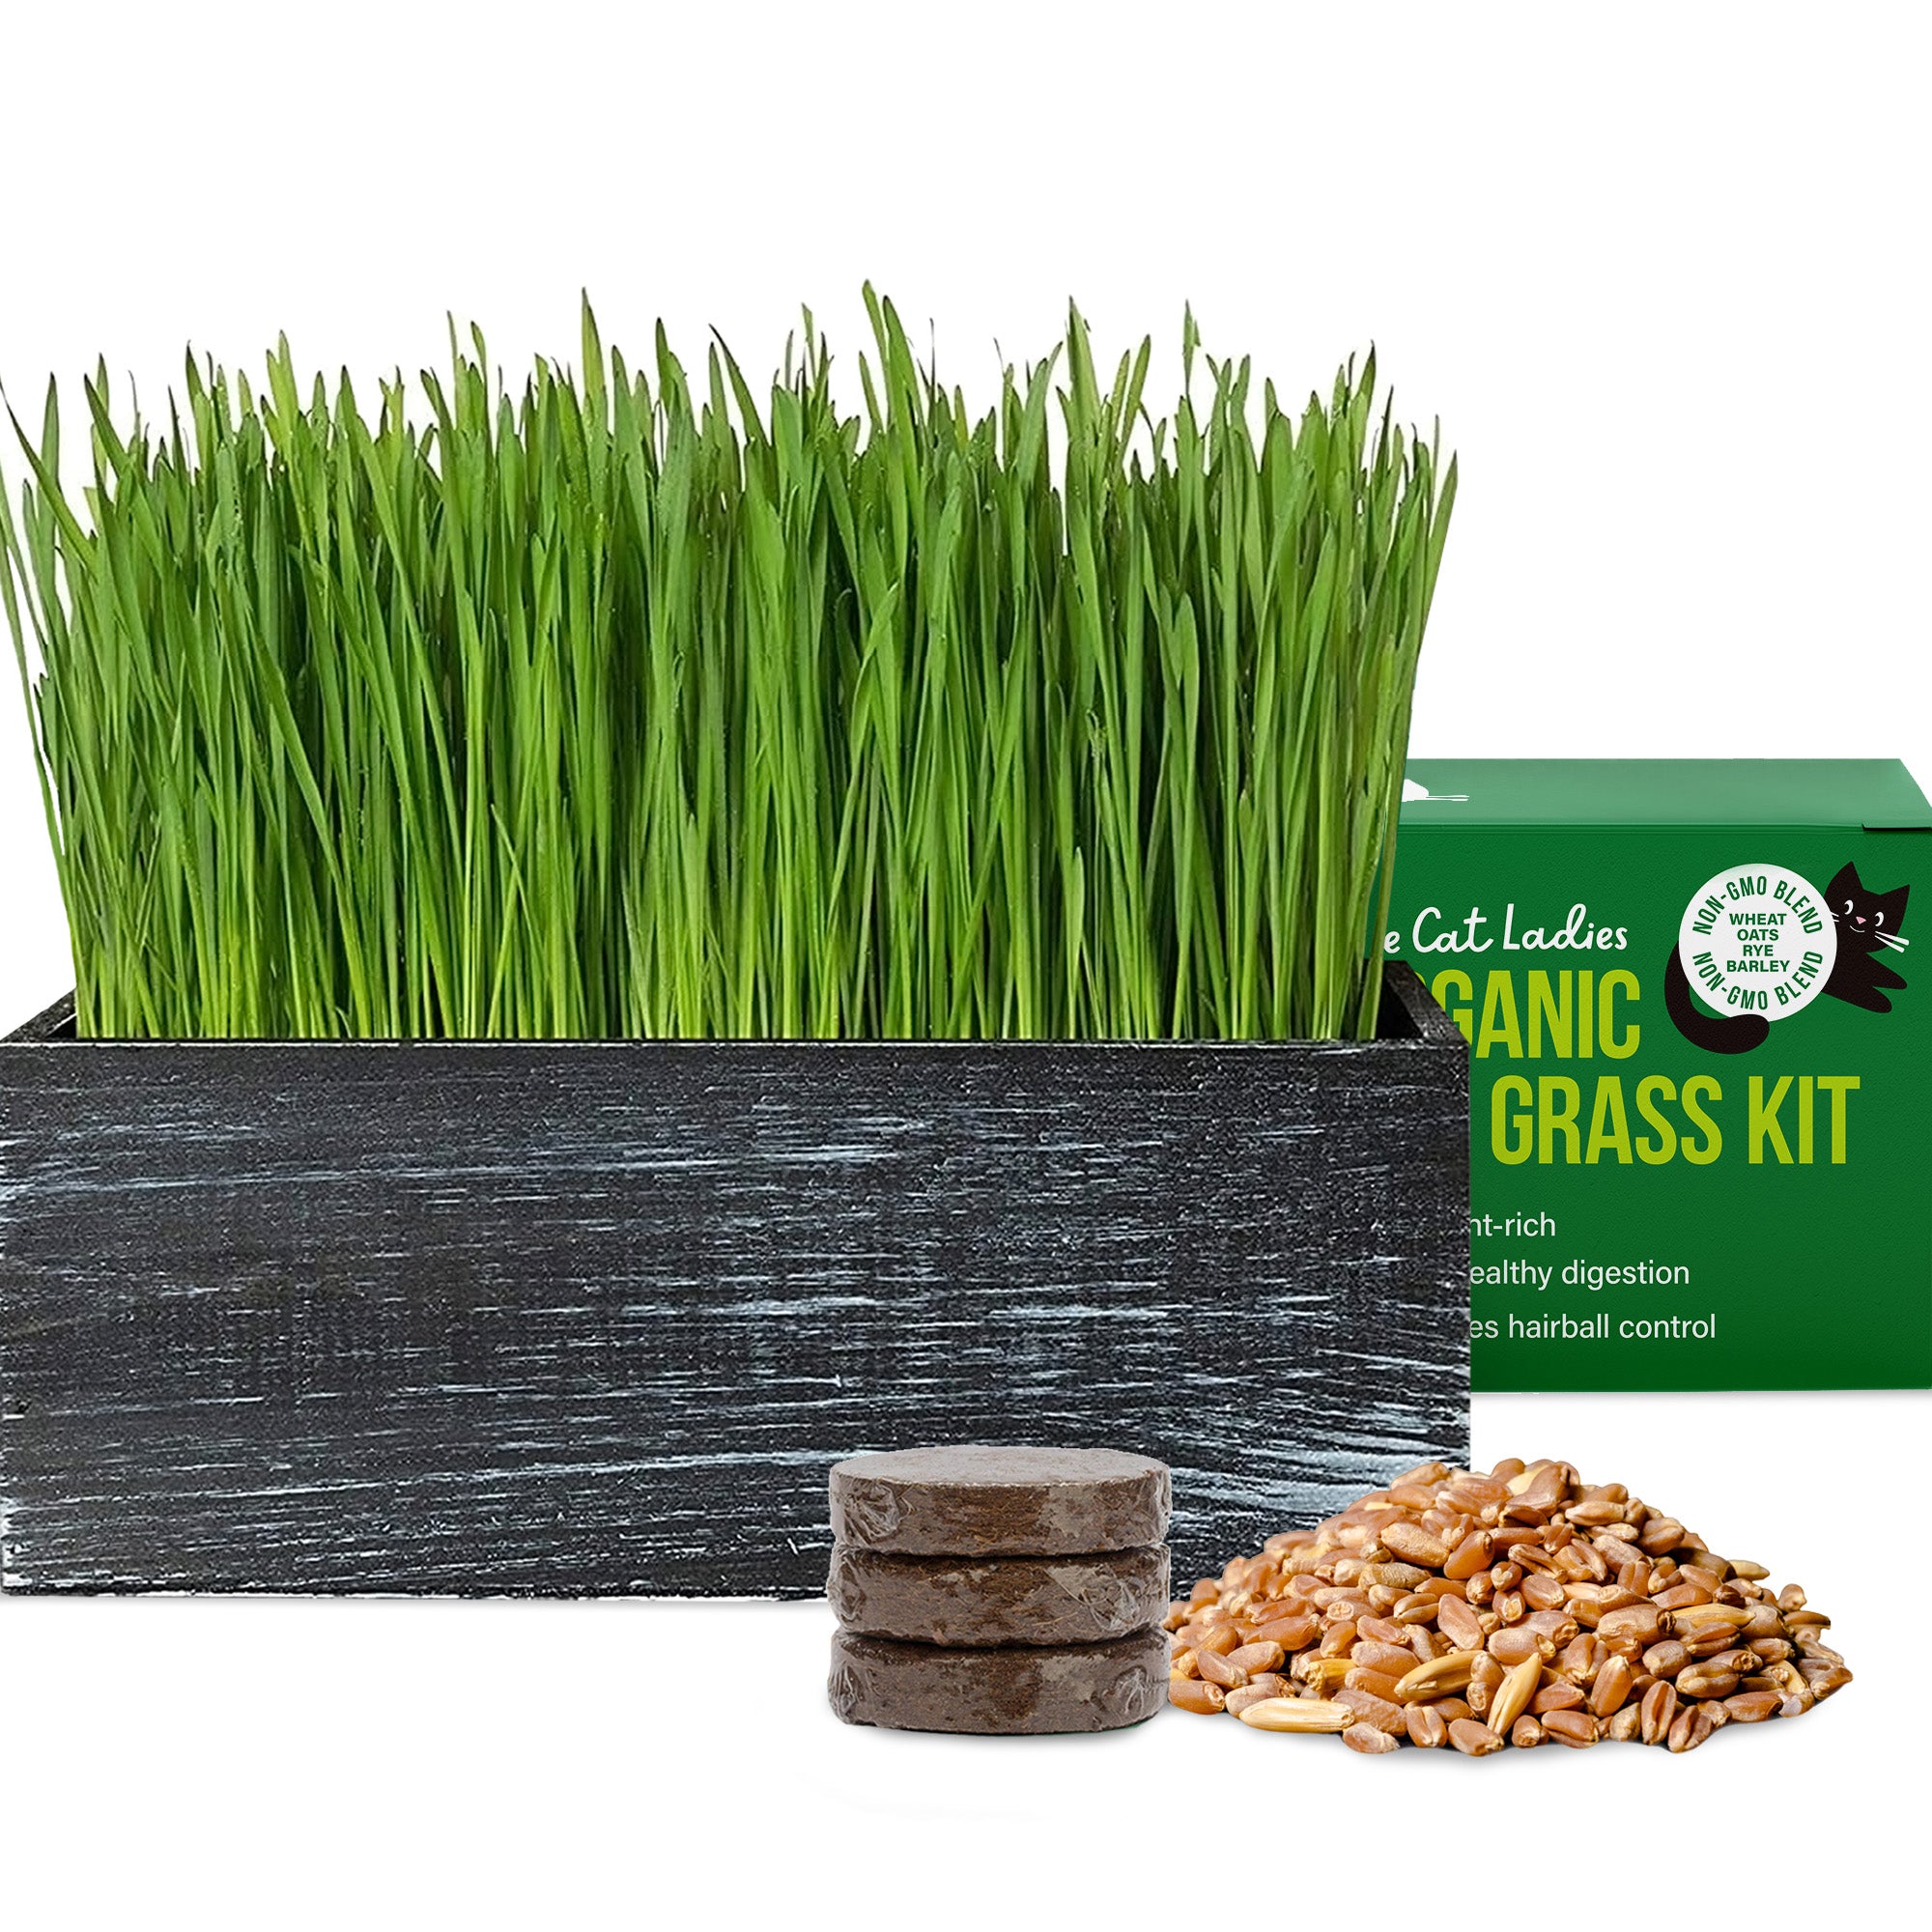 Cat Grass Kit (Organic) Complete with Rustic Wood Planter, Seed and Soil - Black